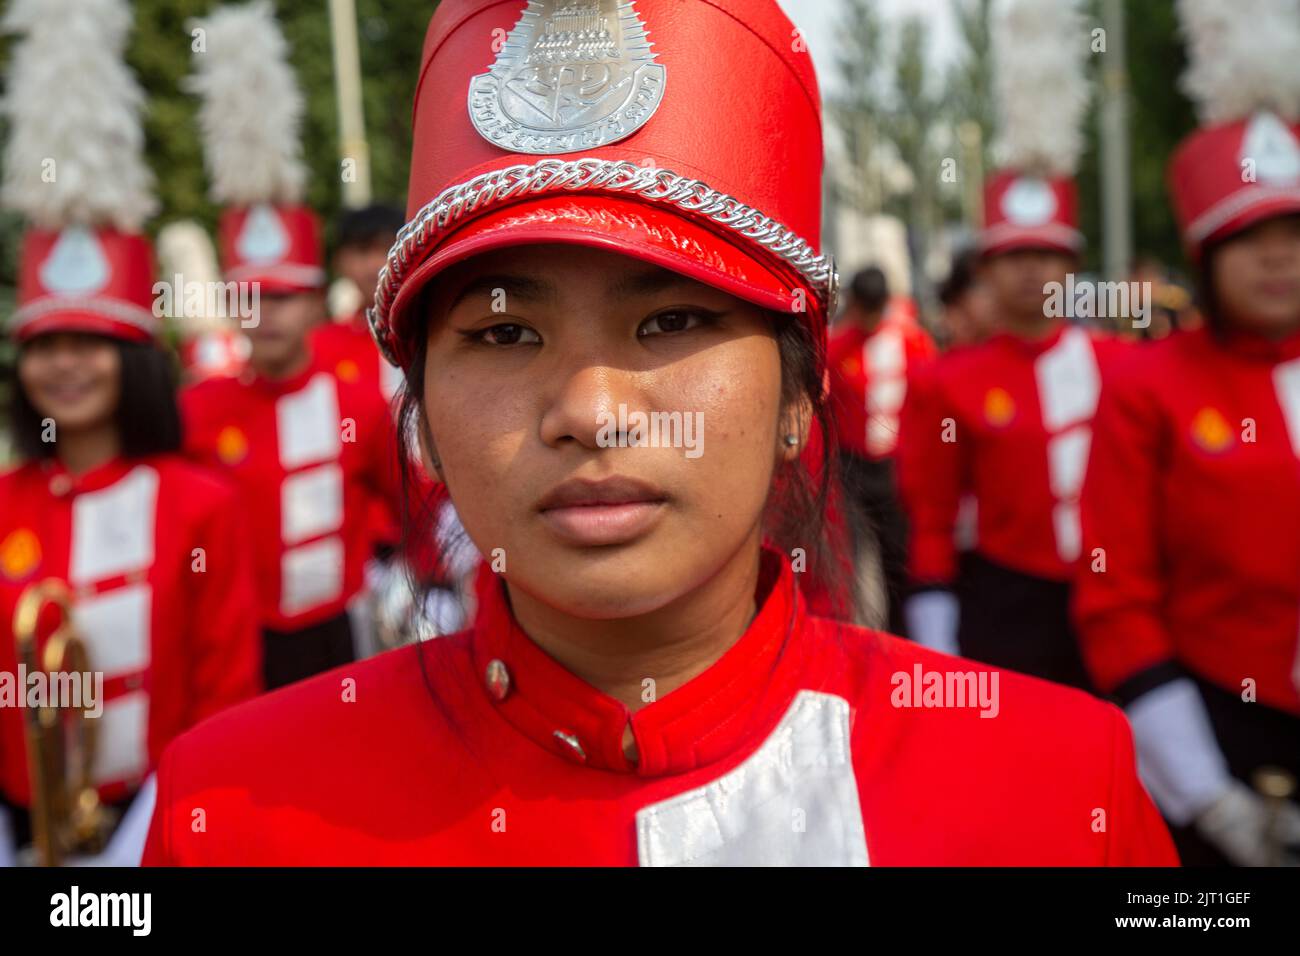 Moscow, Russia. 27th of August, 2022. Boonwattana School Marching Band takes part in the Spasskaya Tower 2022 International Military Music Festival parade in the VDNKh Exhibition Centre in Moscow, Russia. Nikolay Vinokurov/Alamy Live News Stock Photo